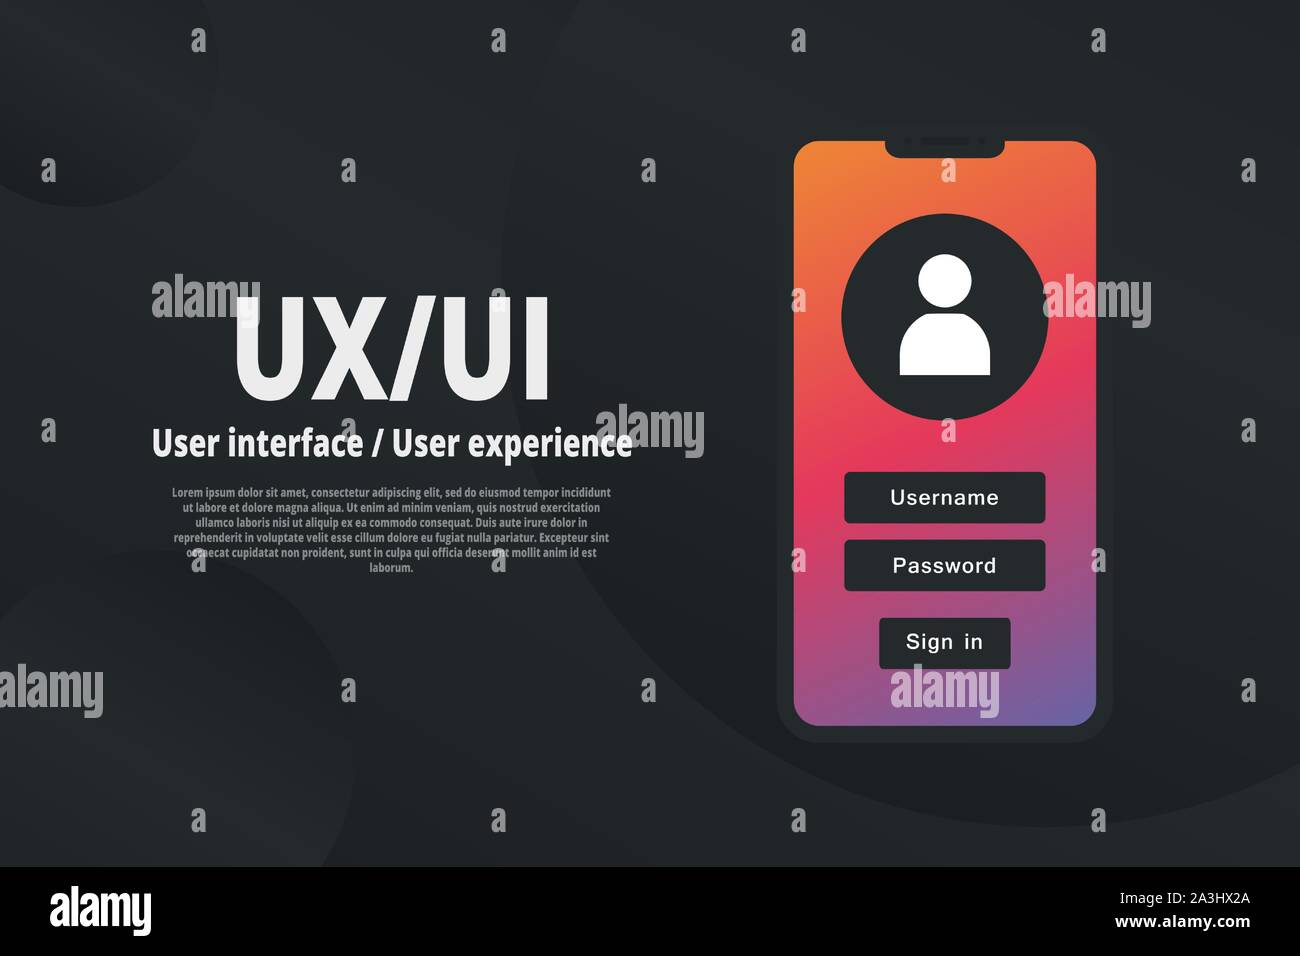 User experience, user interface poster. Mobile template banner for a ...